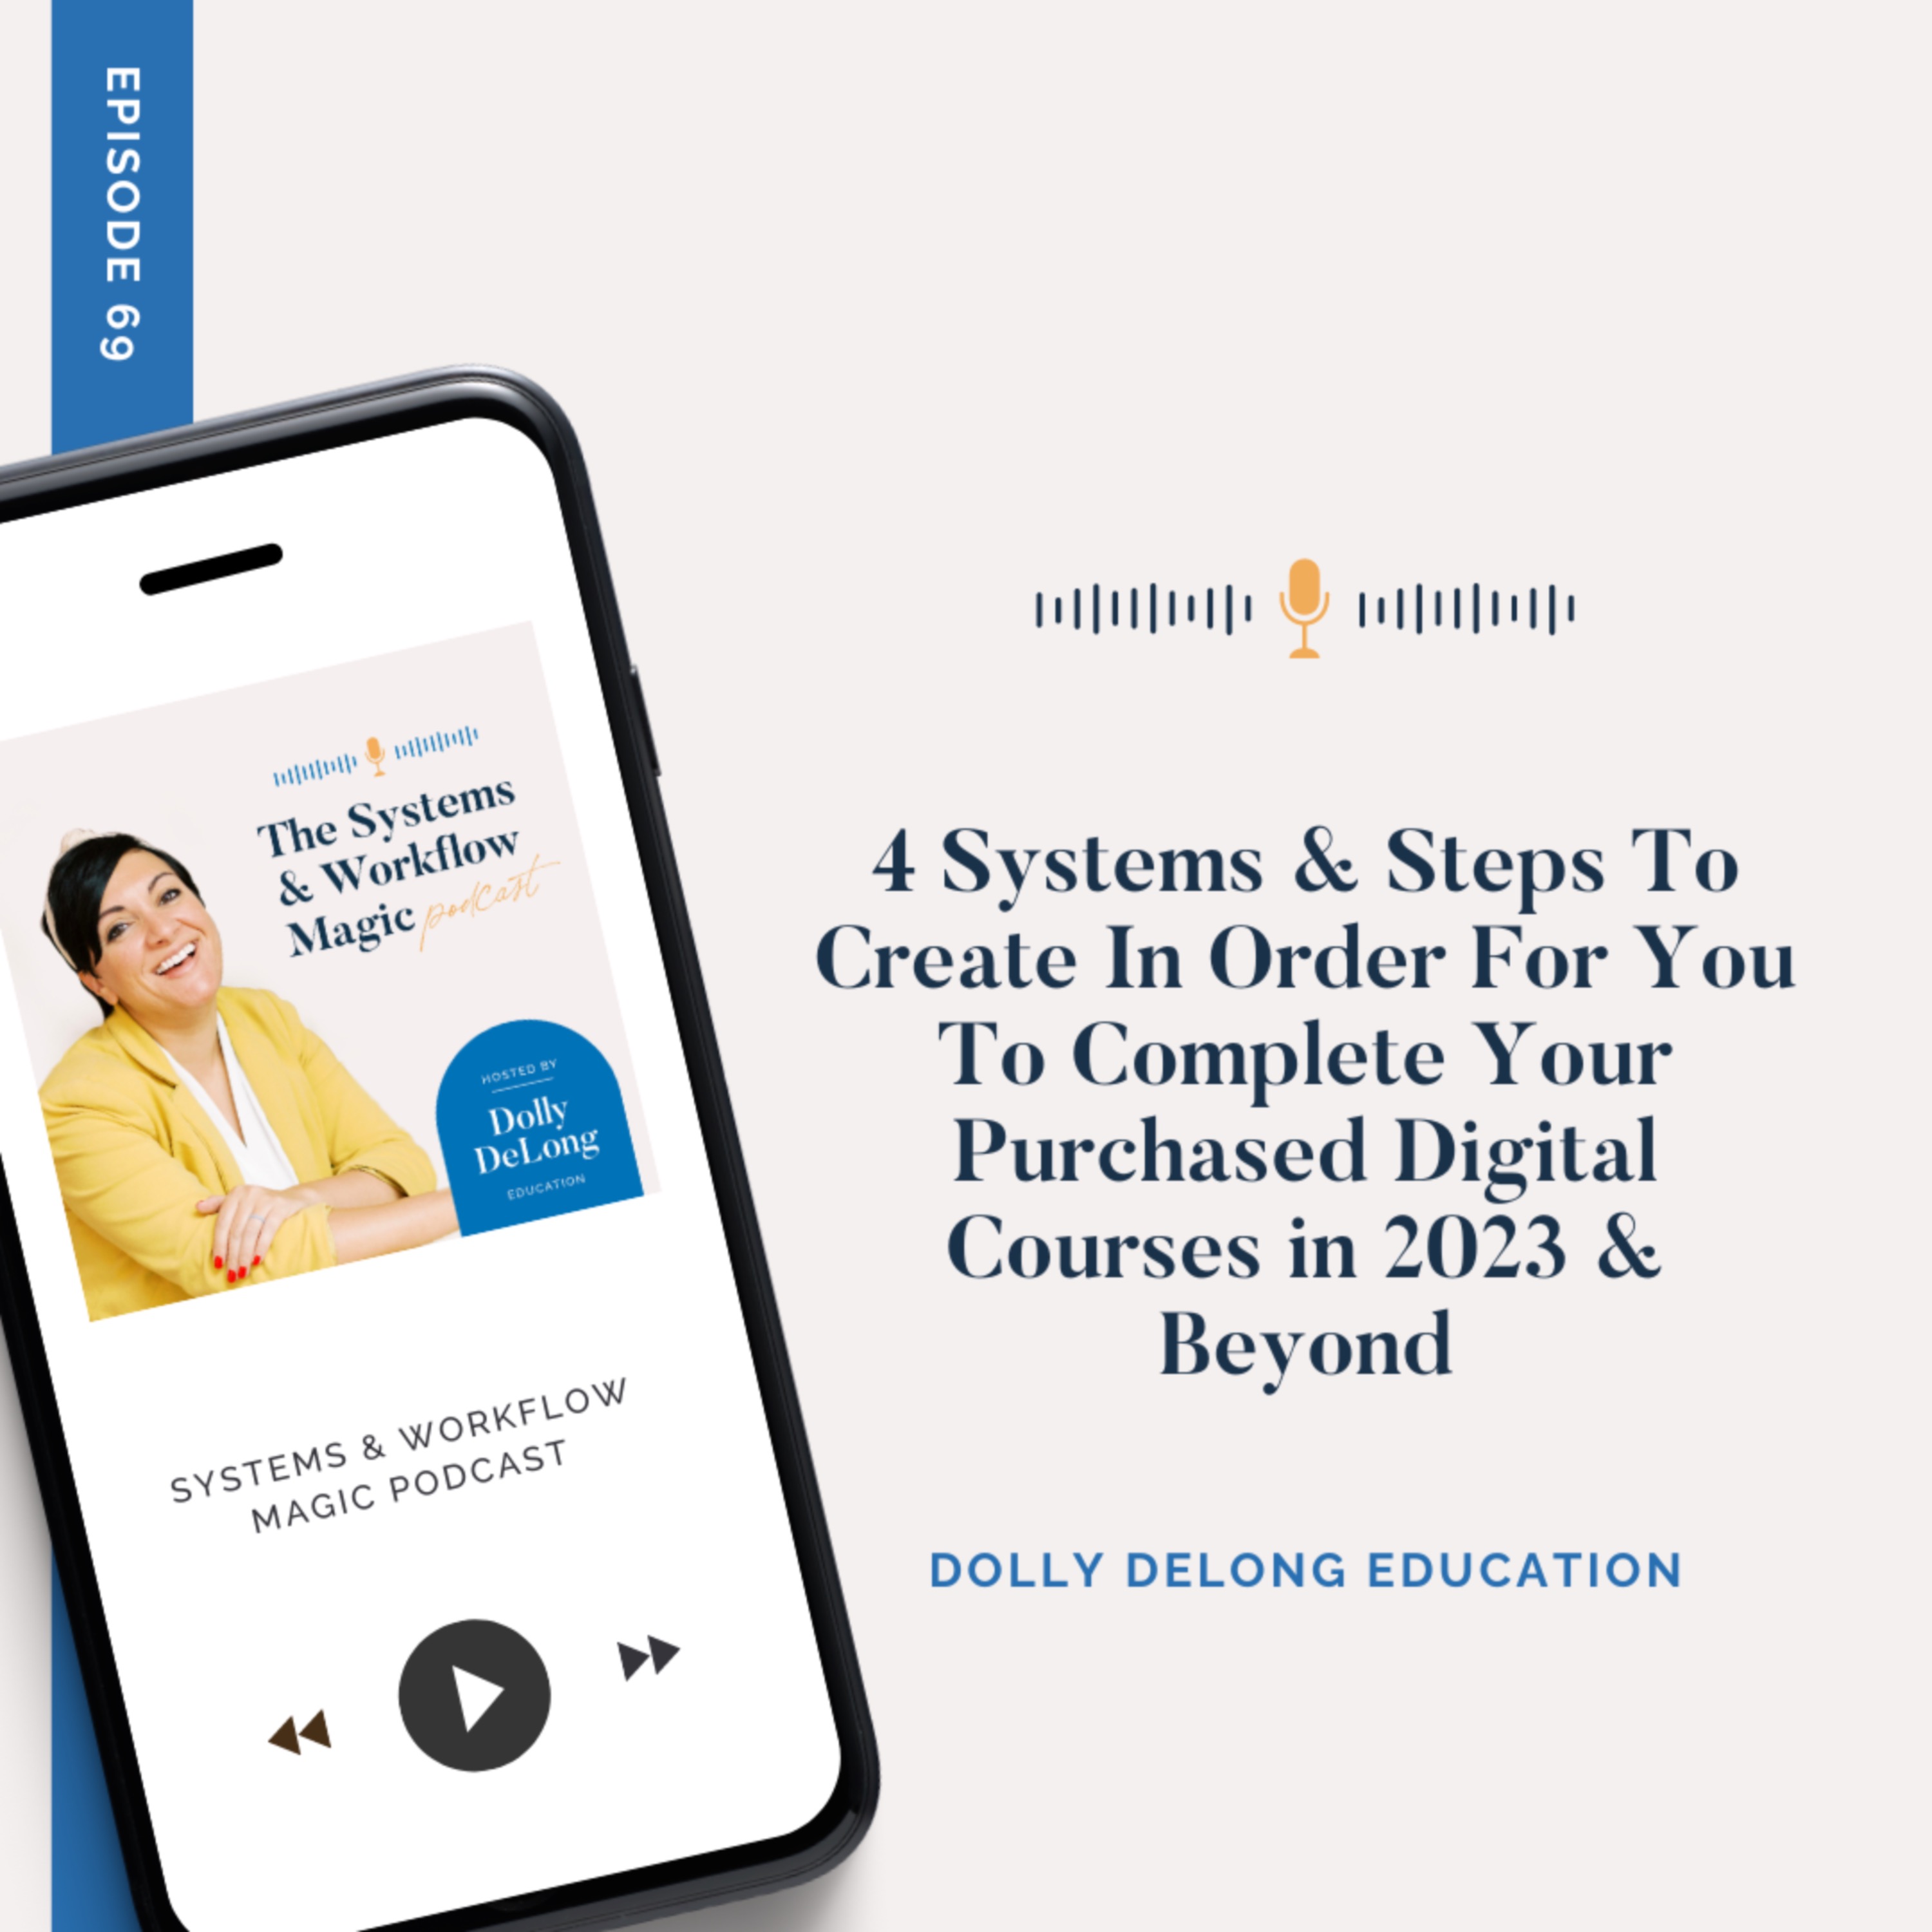 69: 4 Systems & Steps to Help You Complete Your Purchased Digital Courses in 2023 & Beyond